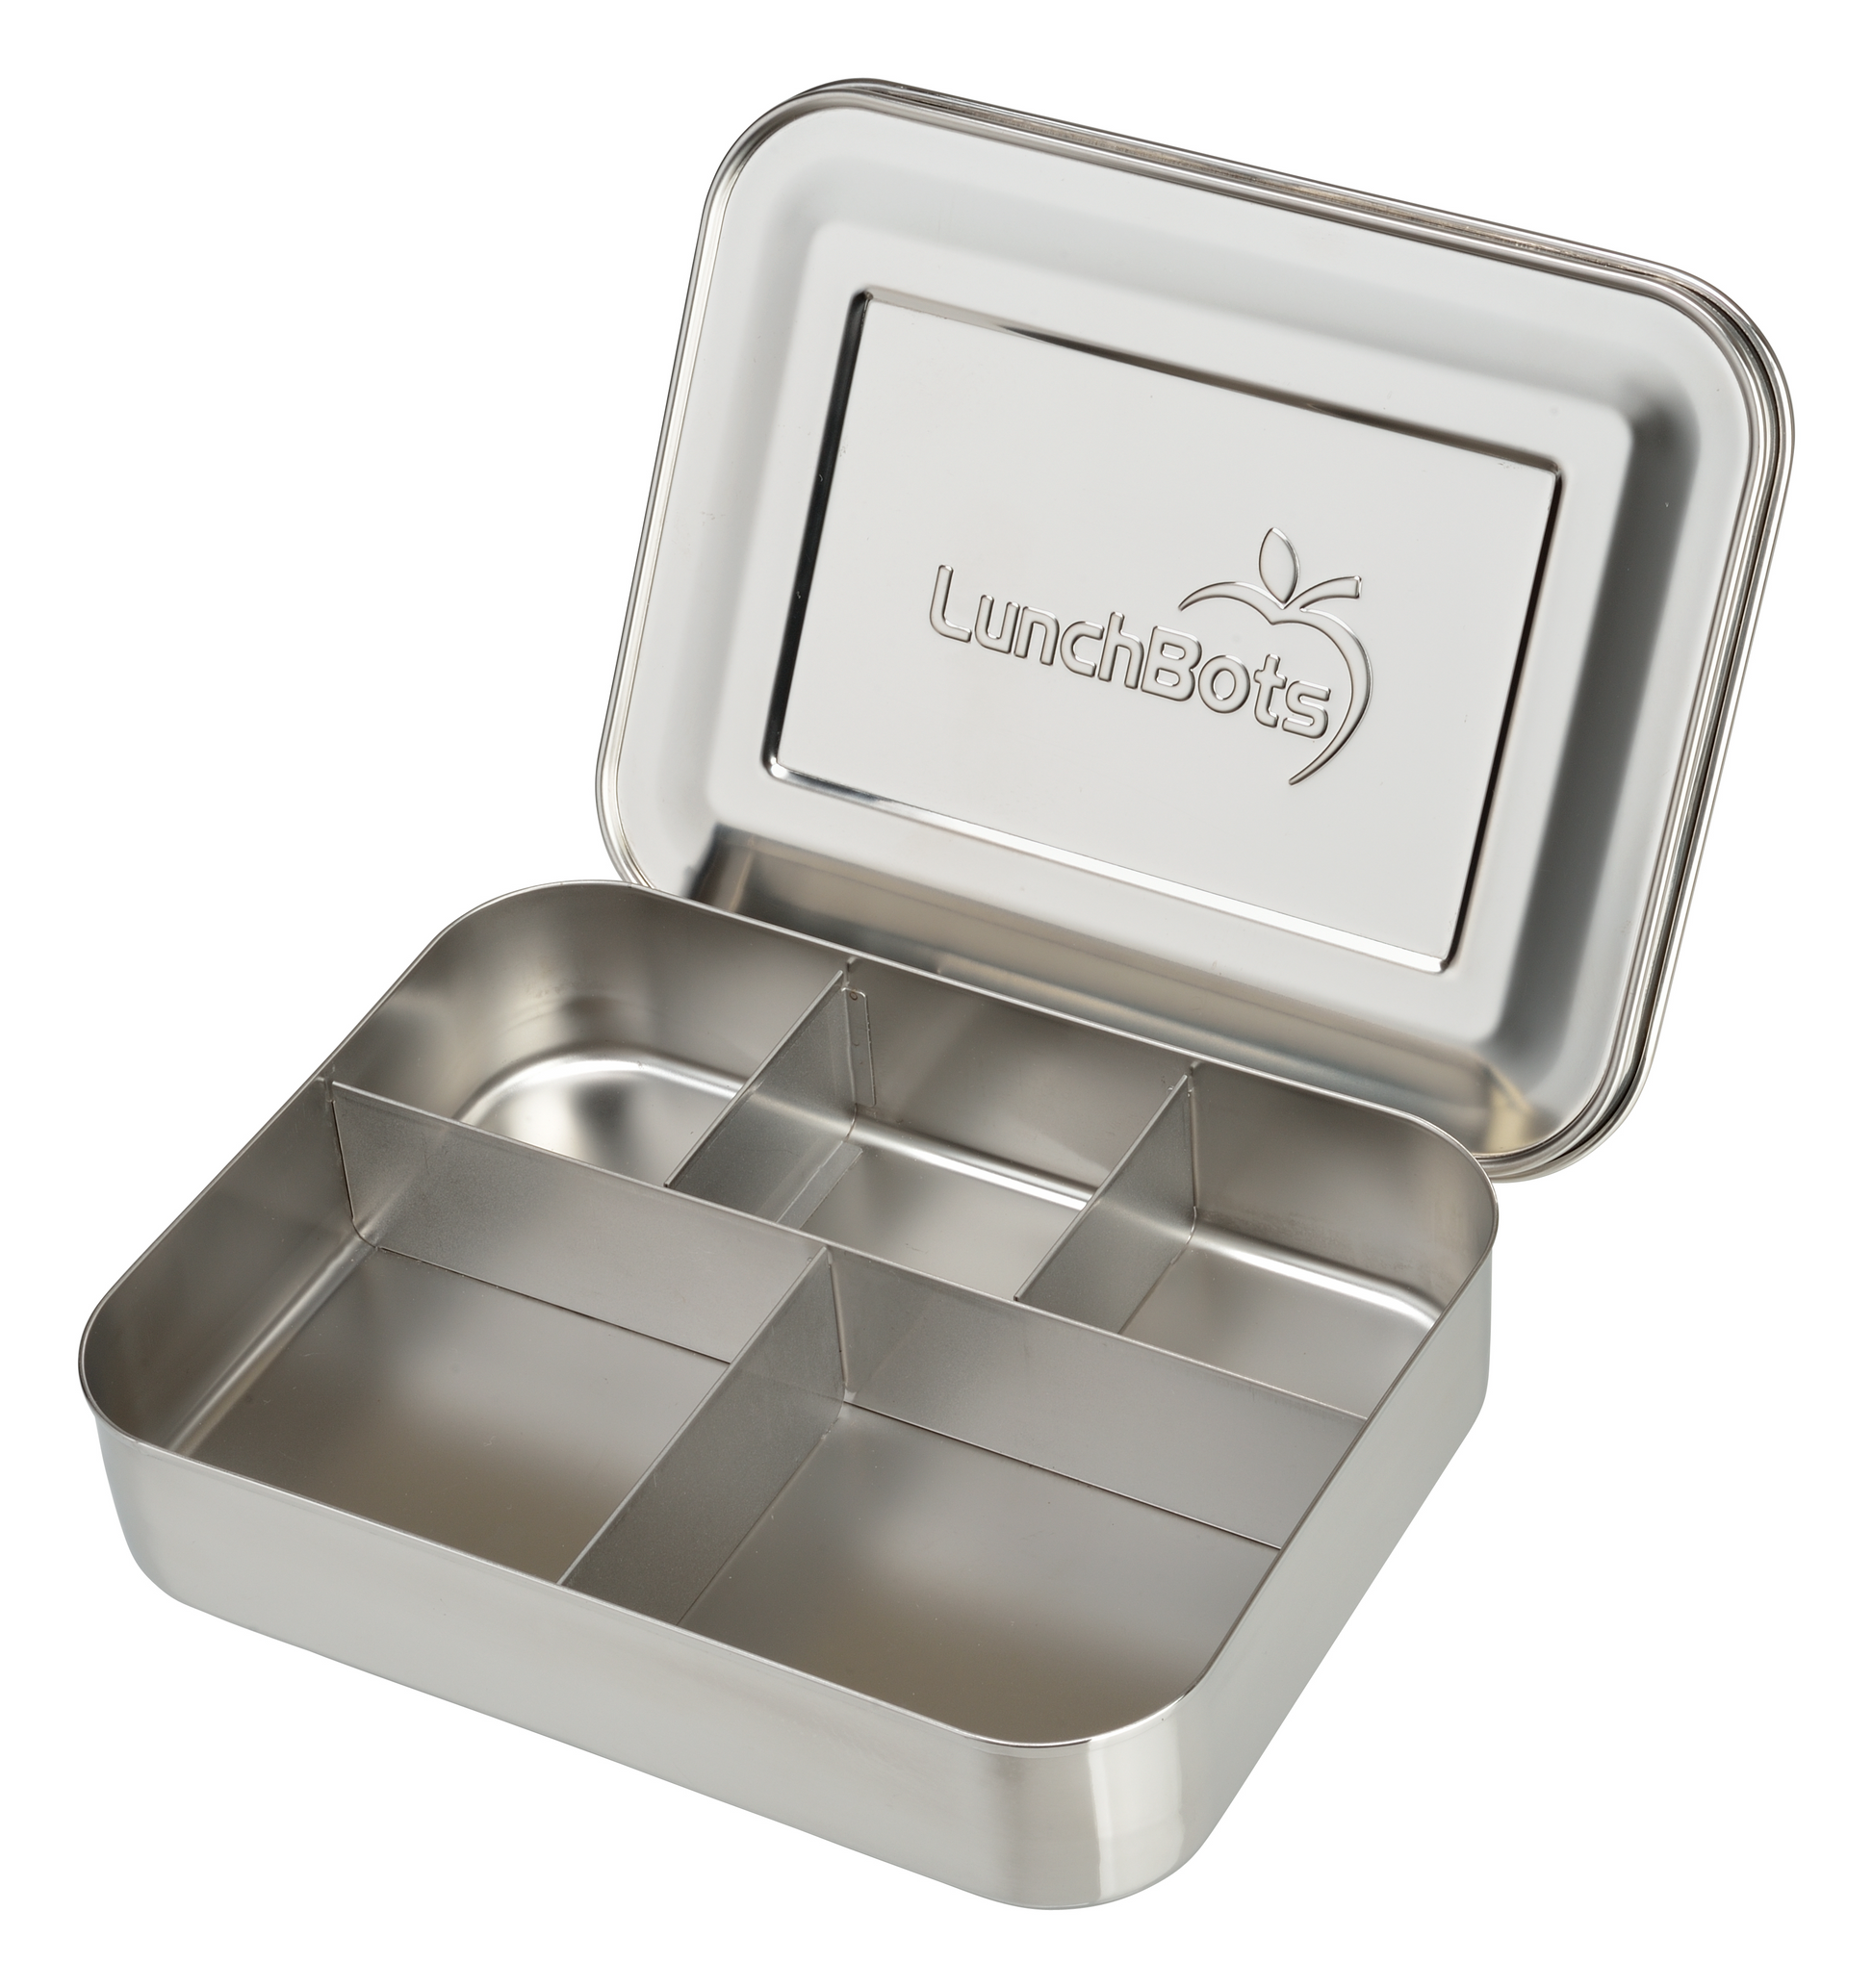 LunchBots Cinco Stainless Steel 5 Compartment Bento Box Stainless